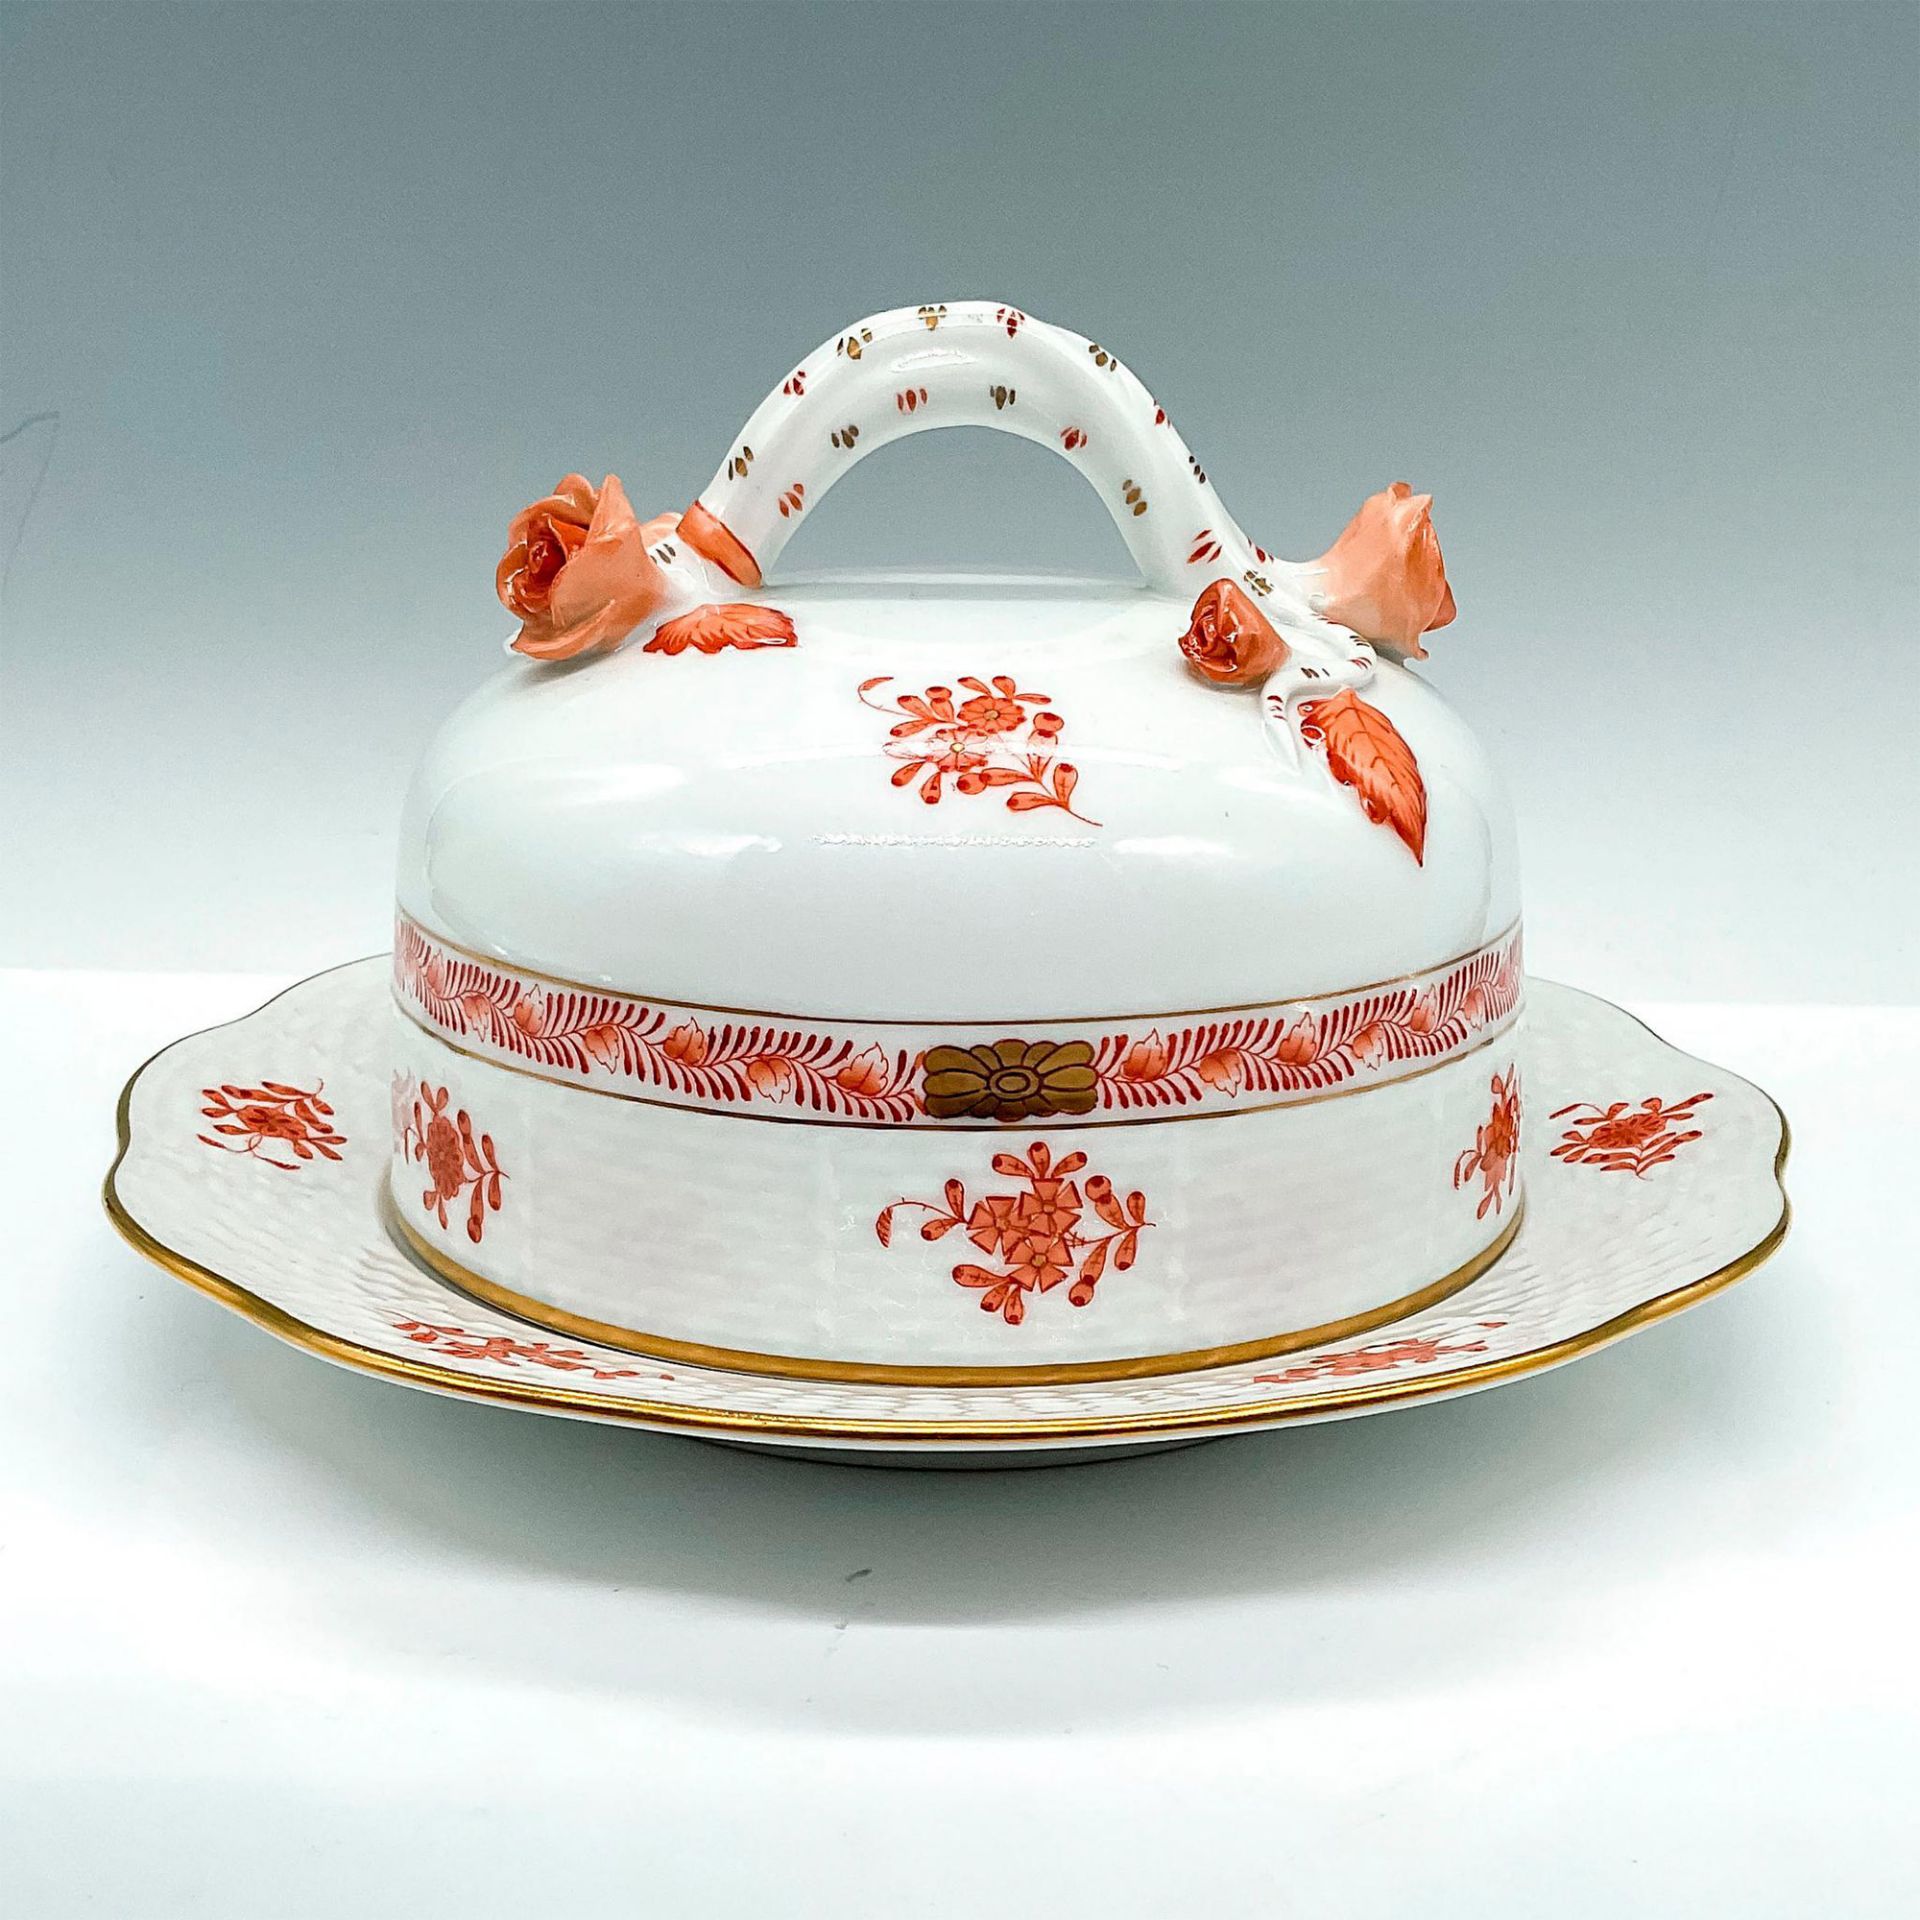 Herend Porcelain Butter Dish, Rust Chinese Bouquet - Image 2 of 4